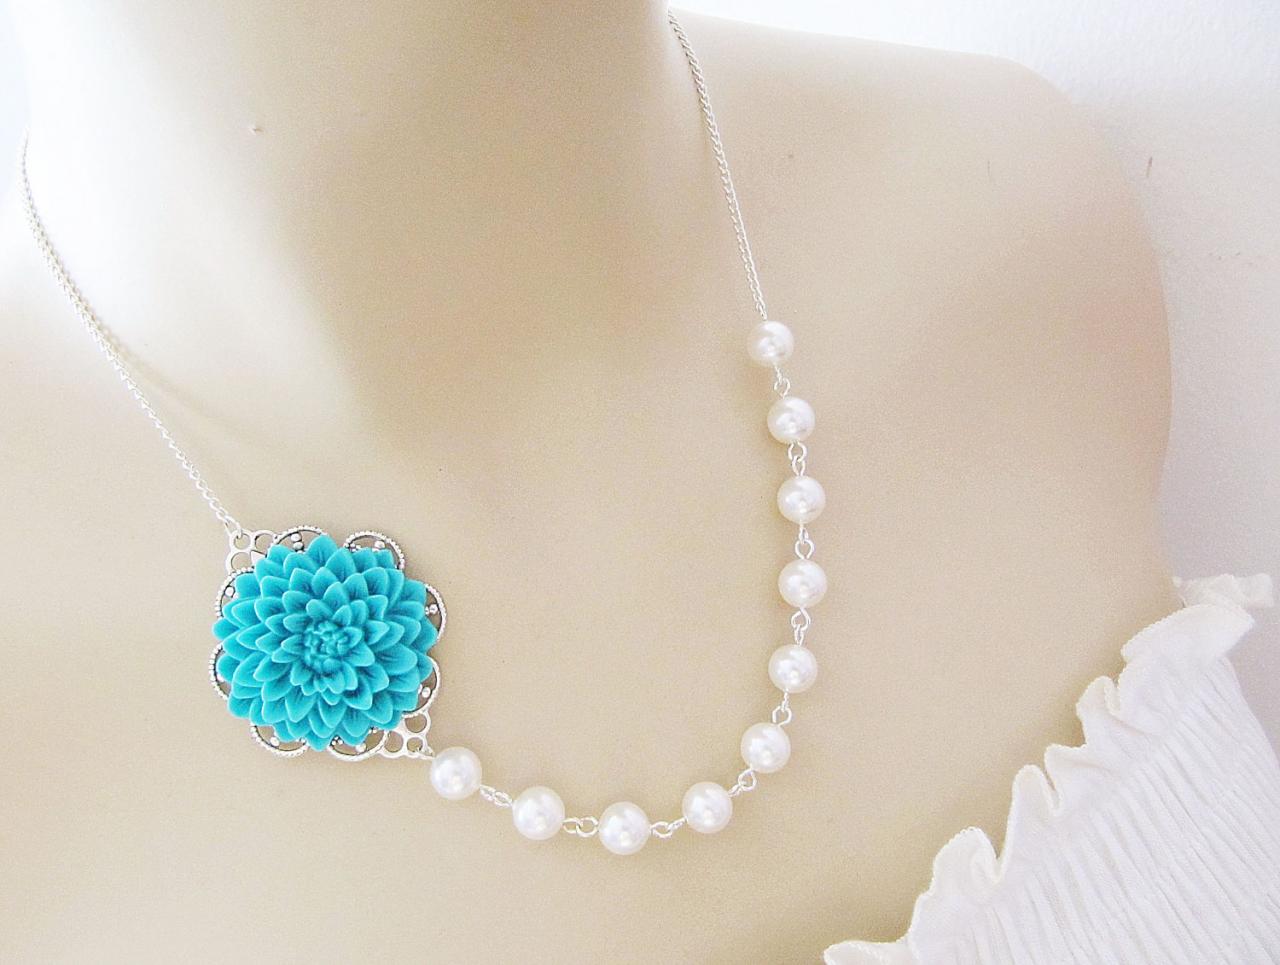 Wedding Jewelry Bridesmaid Jewelry Bridal Necklace Bridesmaid Necklace - Turquoise blue Flower Cabochon and Crystal White Swarovski Pearls